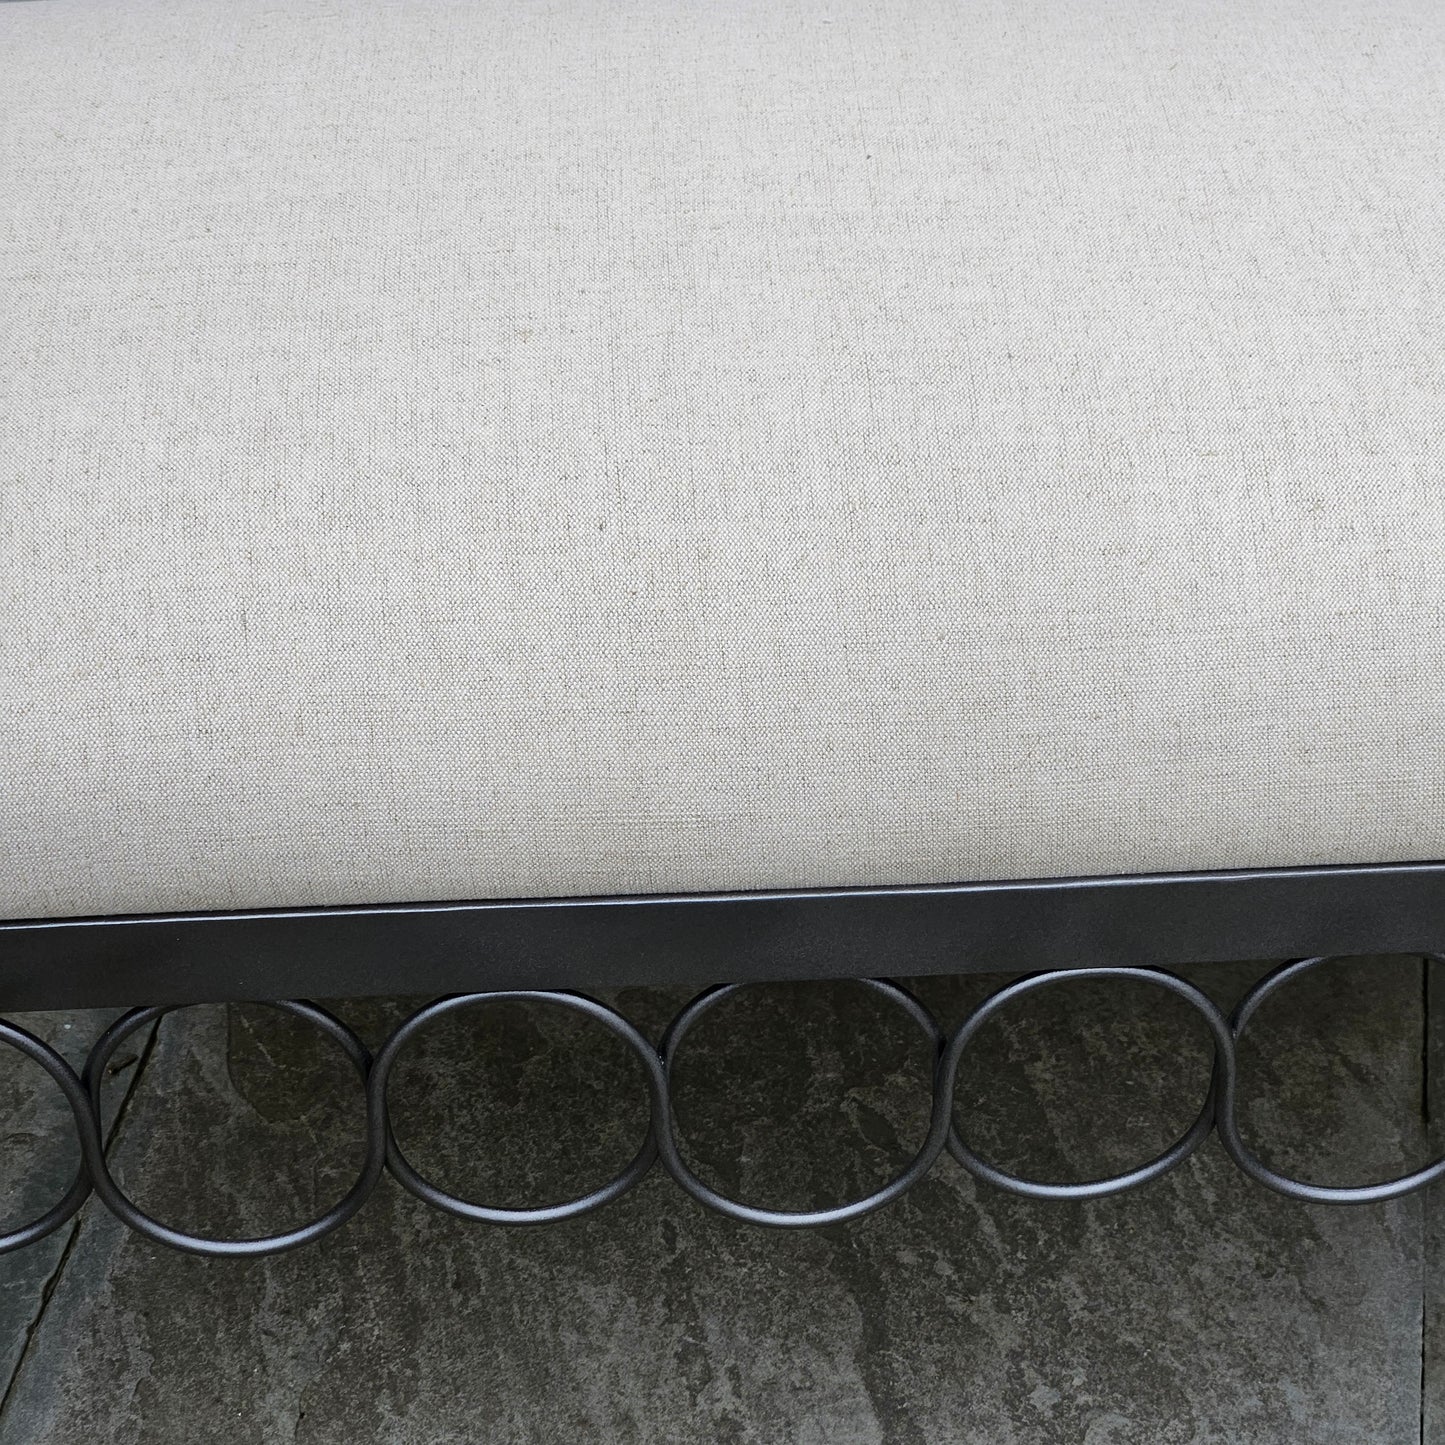 Decorator Iron Bench with Upholstered Seat ~ 2 Available